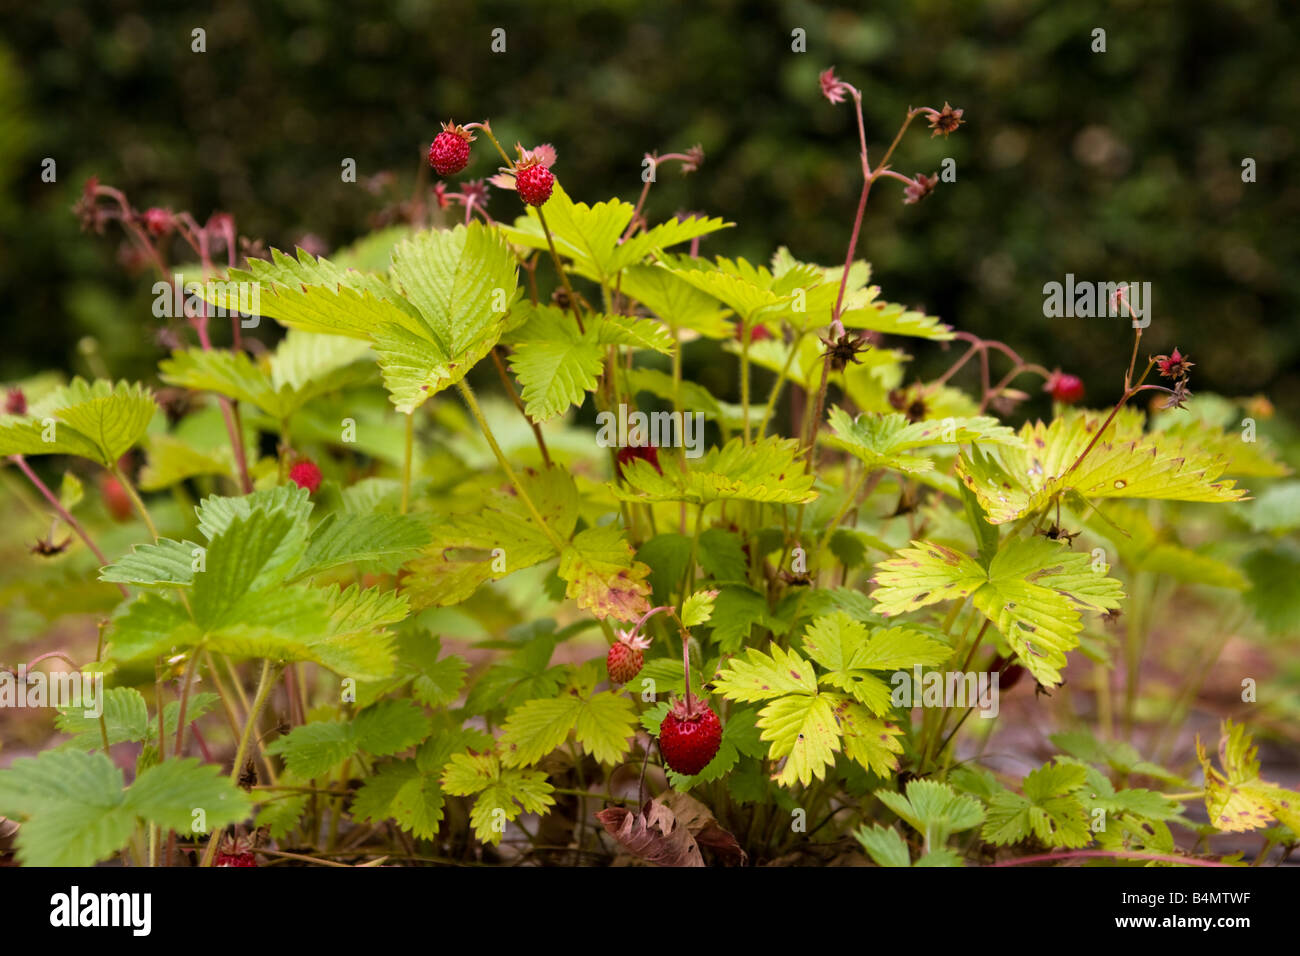 A wild strawberry plant with berries (Fragaria vesca L) amidst the bricks of an overgrown patio in the French countryside Stock Photo